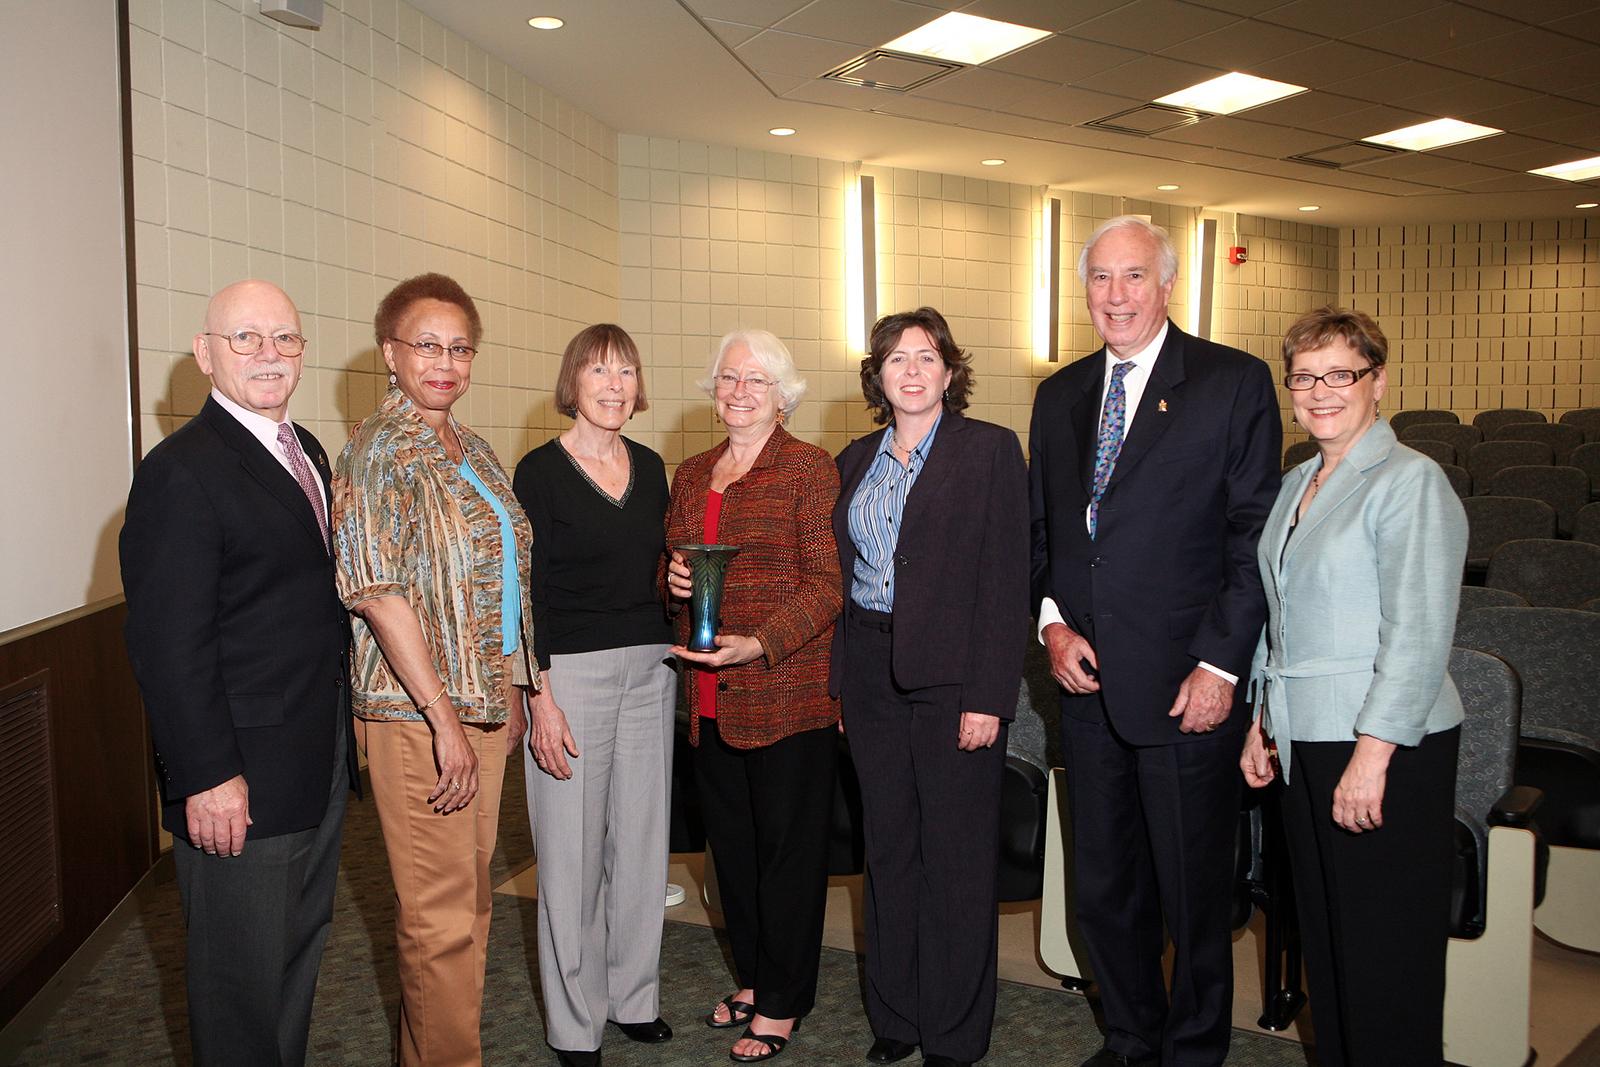 Bob Gold, Carlessia Hussein, Alice Horowitz, Rima Rudd, Cynthia Baur, Dan Mote and Bonnie Braun at the launch of the Horowitz Center for Health Literacy in 2007